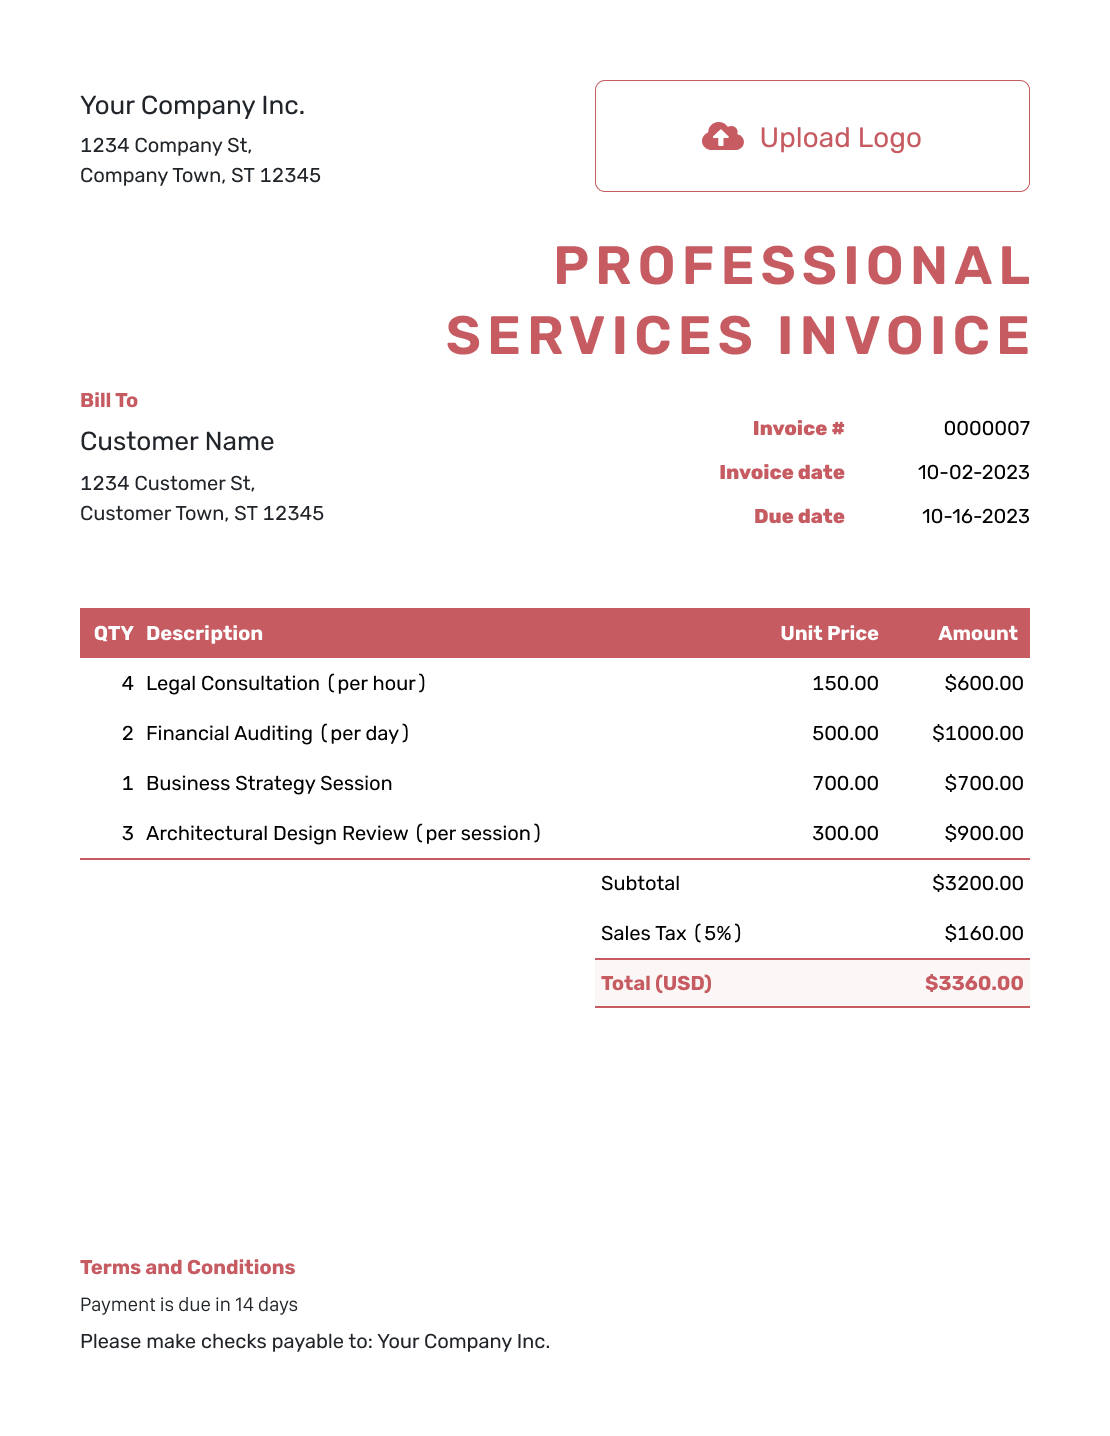 Itemized Professional Services Invoice Template